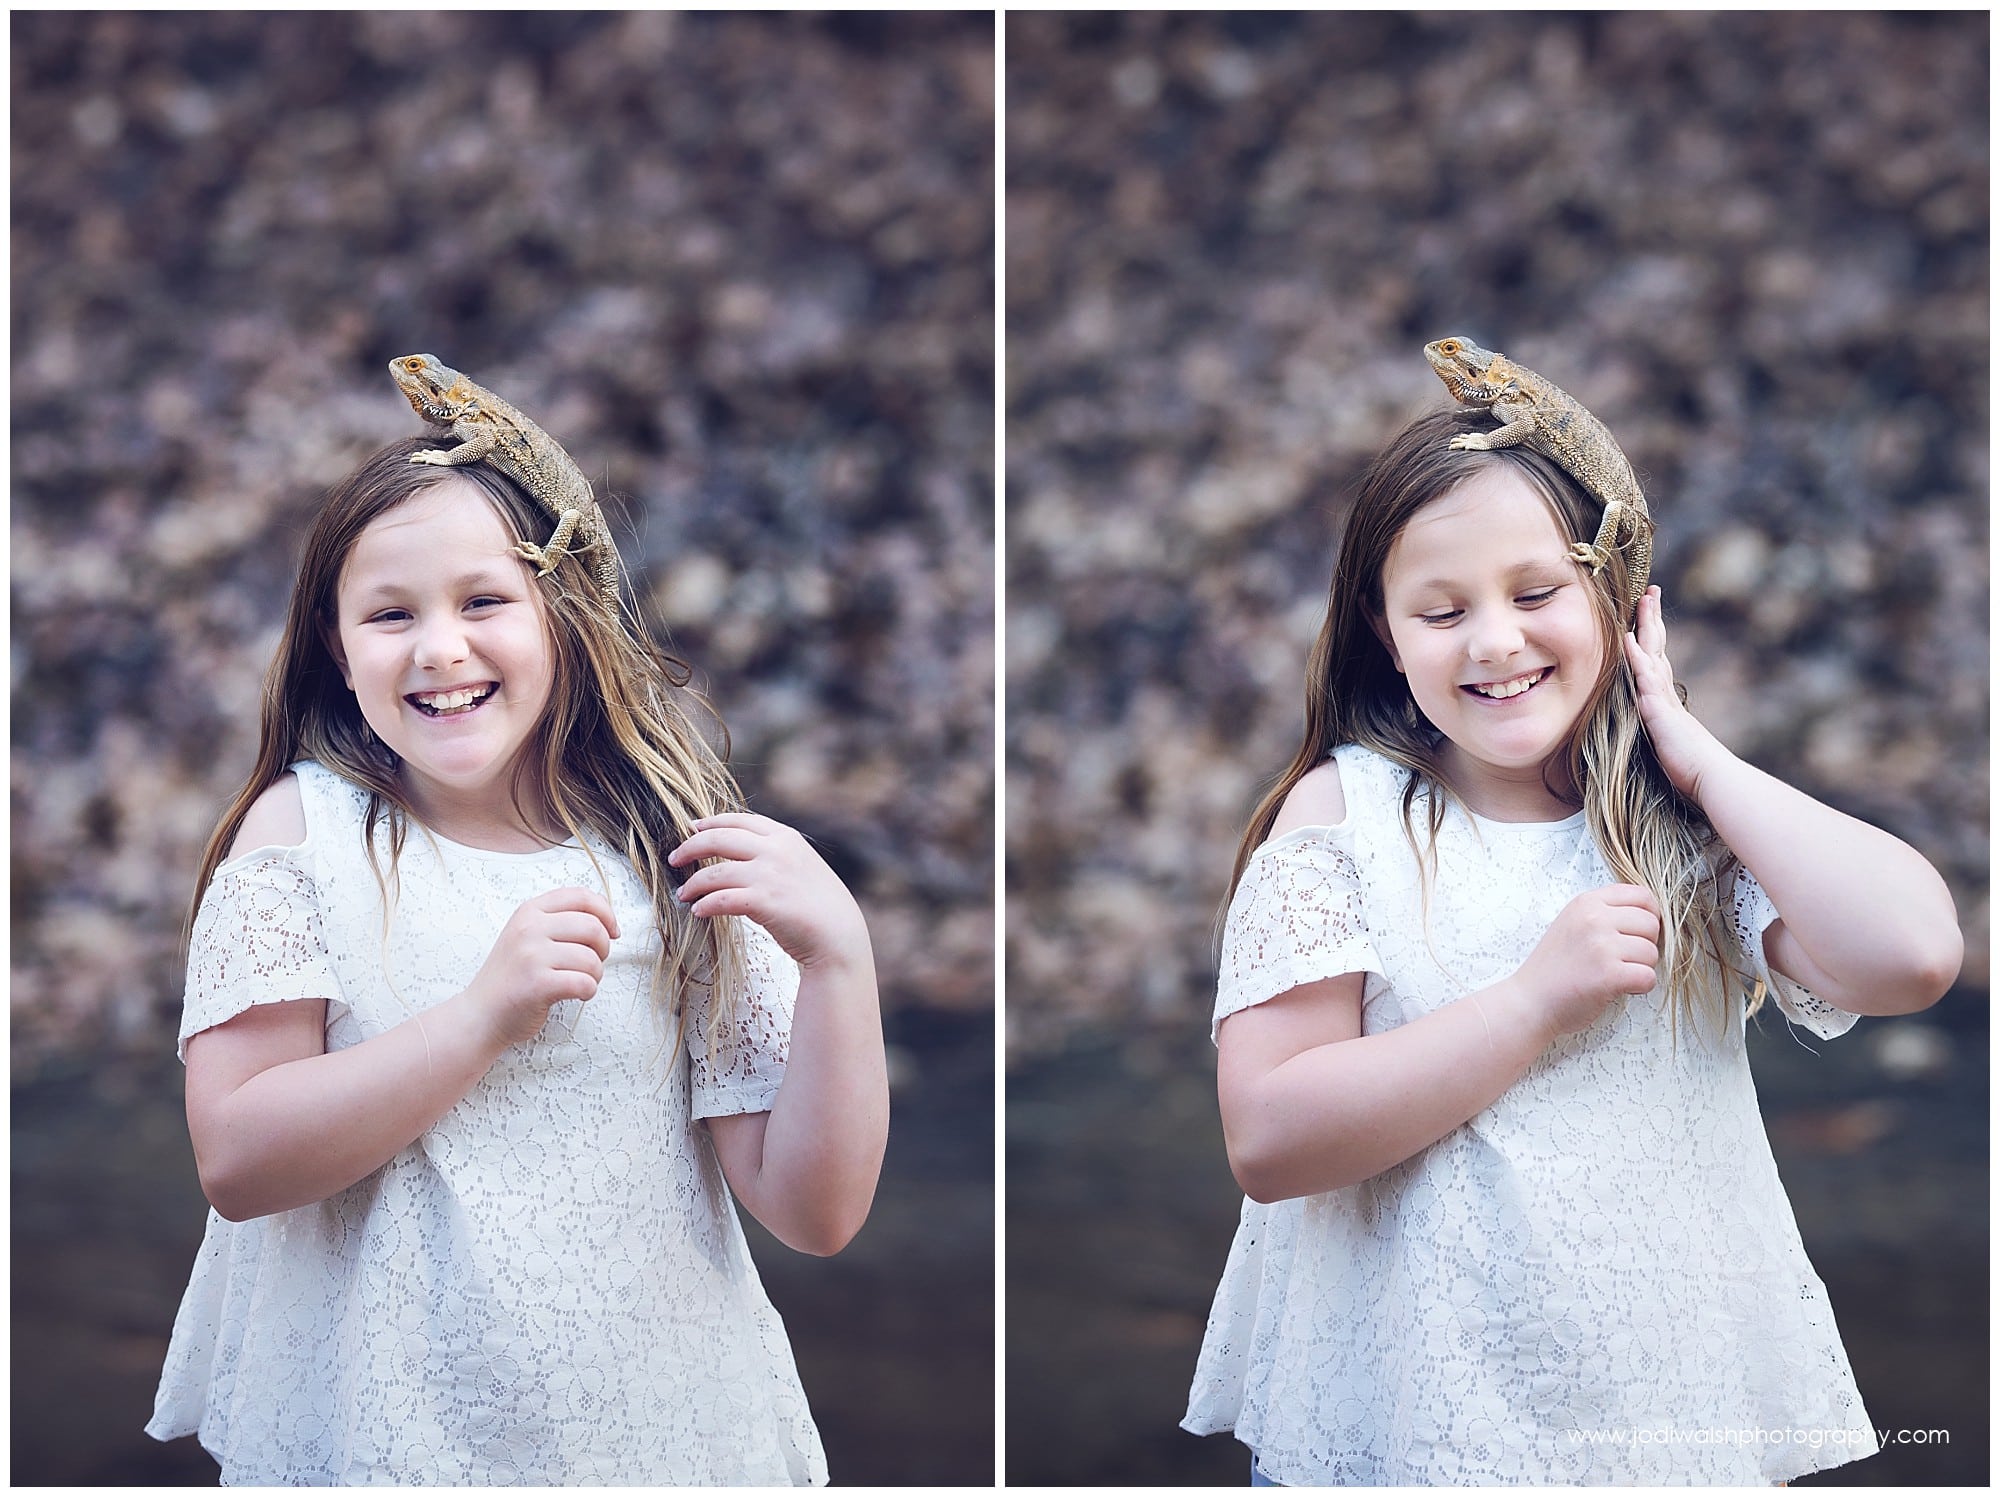 little girl with her pet bearded dragon lizard sitting on her head